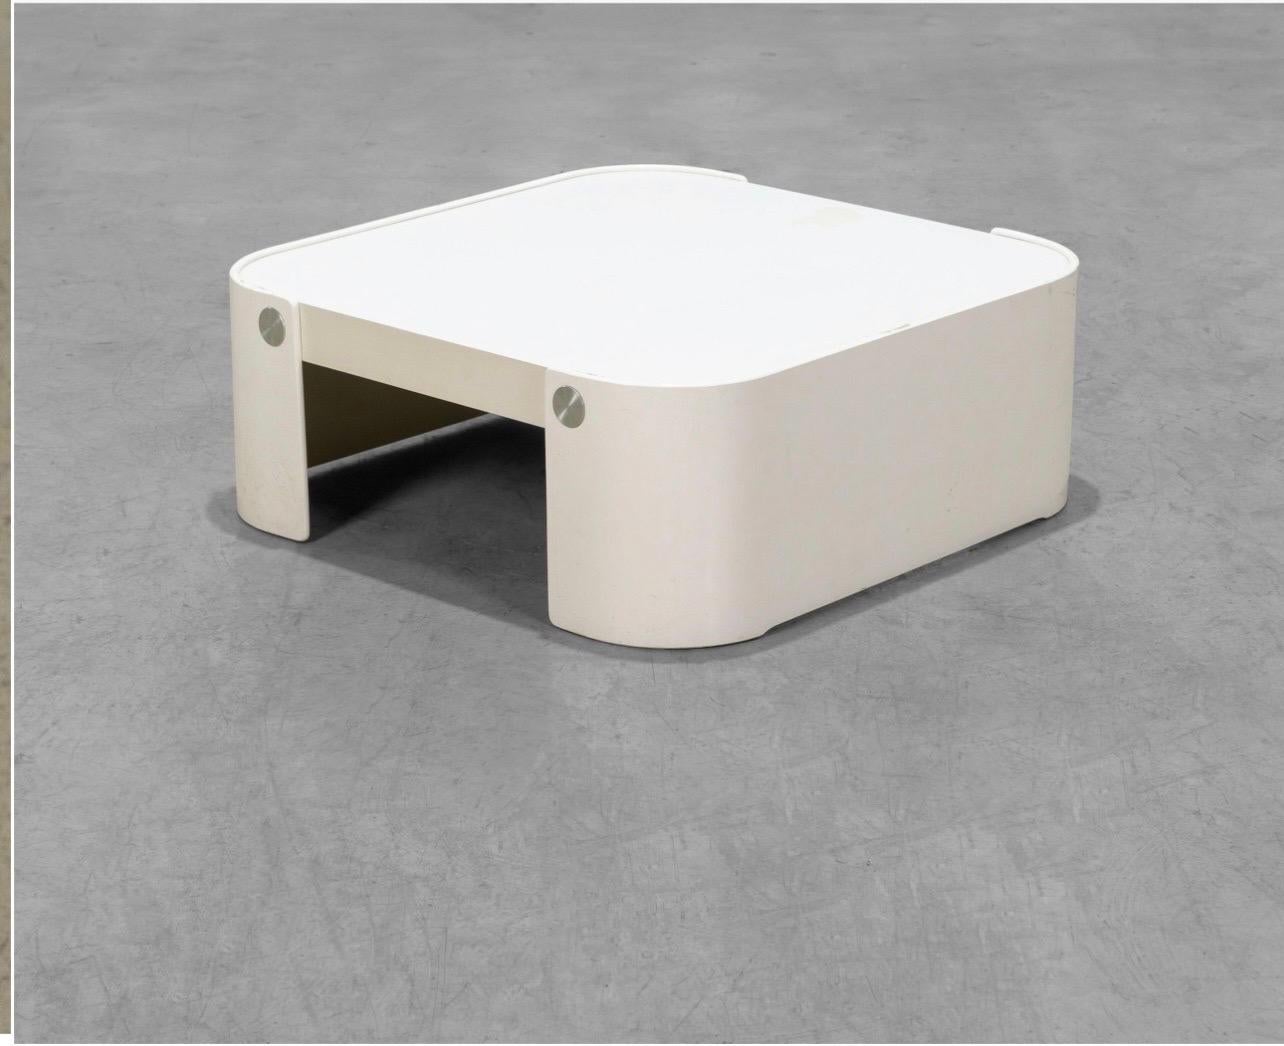 Trinom white coffee table by Peter Maly for COR. circa 1970.

Curved bentwood legs supporting a laminate top, accented with round chrome medallions.

Dimensions: 11.5” H x 30.25” L x 30.25” D.
 